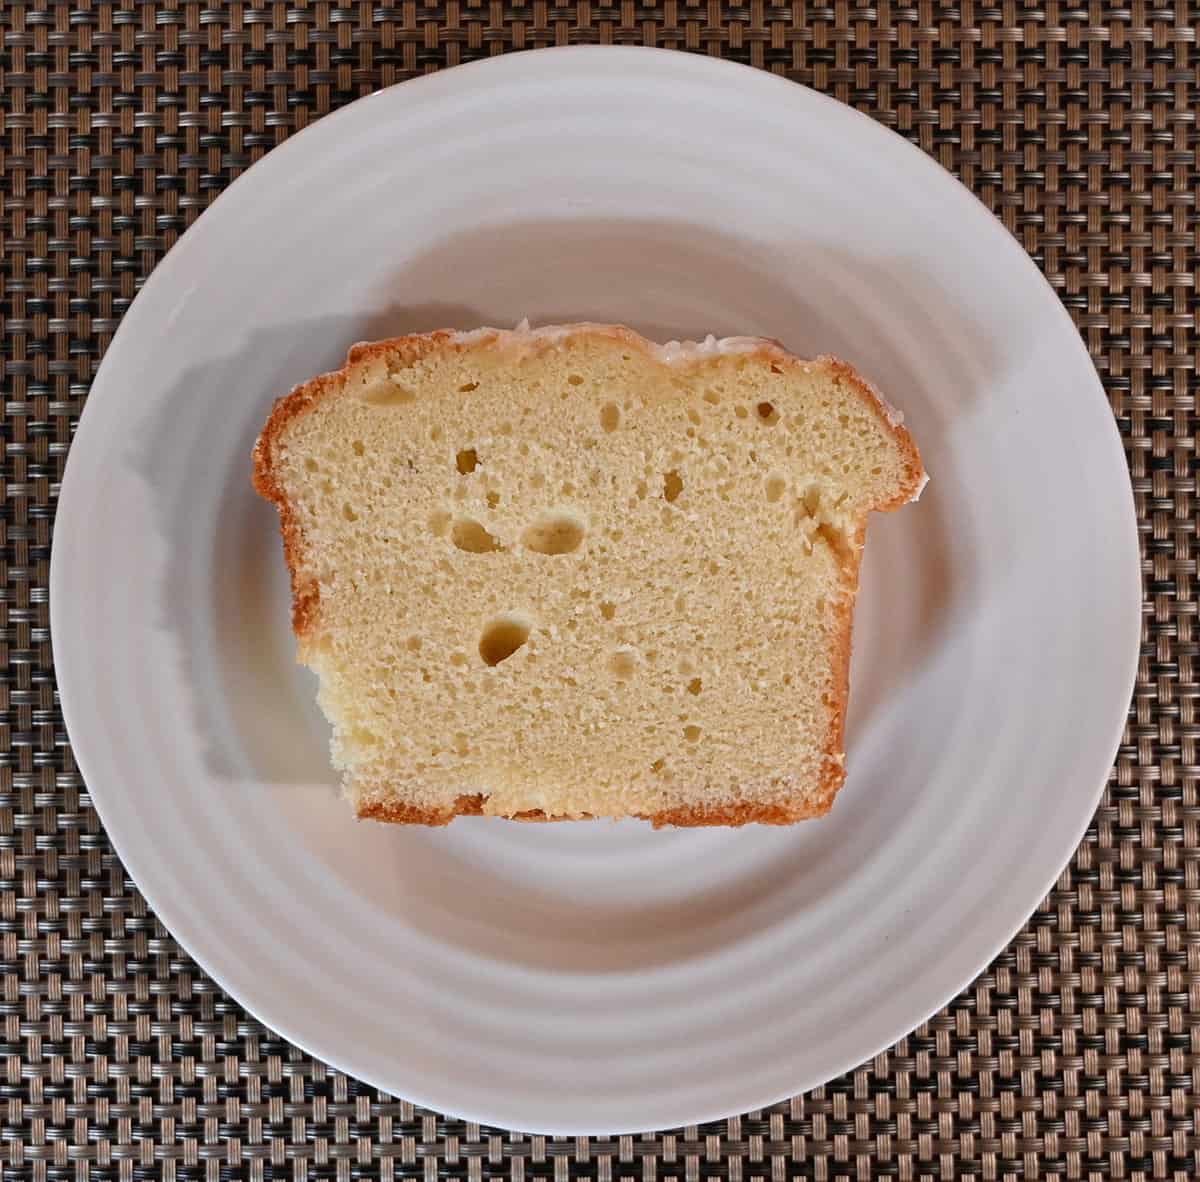 Top down image of a slice of pound cake served on a white plate.